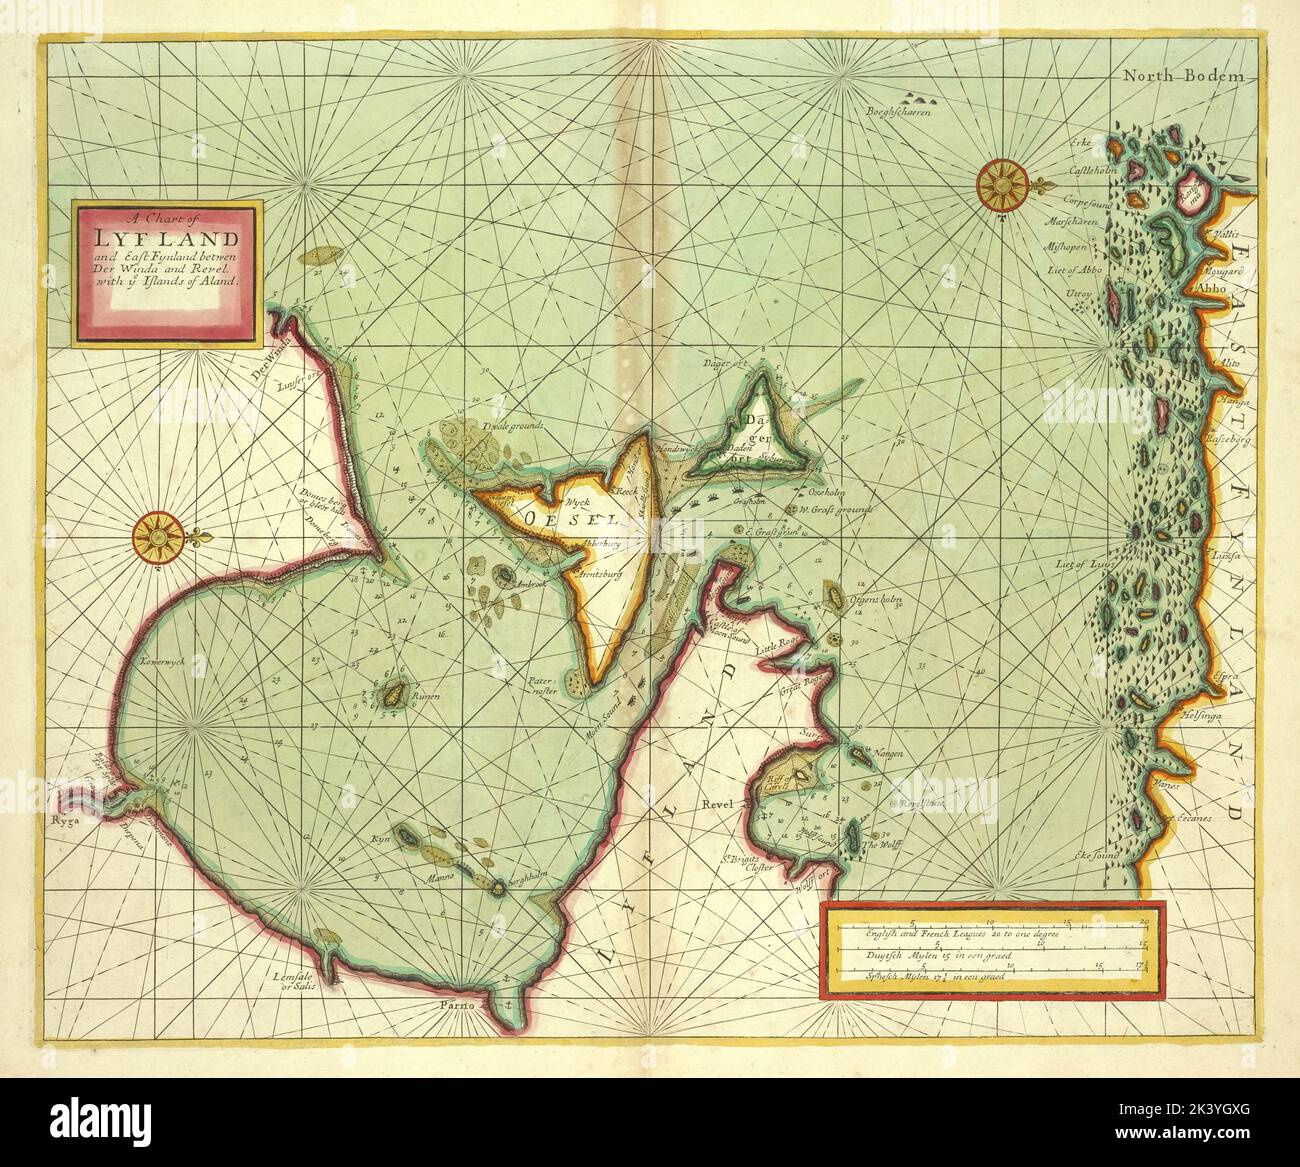 A chart of LYF LAND and East Fynland between Der Winda and Revel with Islands of Aland 1702 - 1707. Cartographic. Maps, Nautical charts. Lionel Pincus and Princess Firyal Map Division. Finland, Gulf of, Riga, Gulf of (Latvia and Estonia) Stock Photo